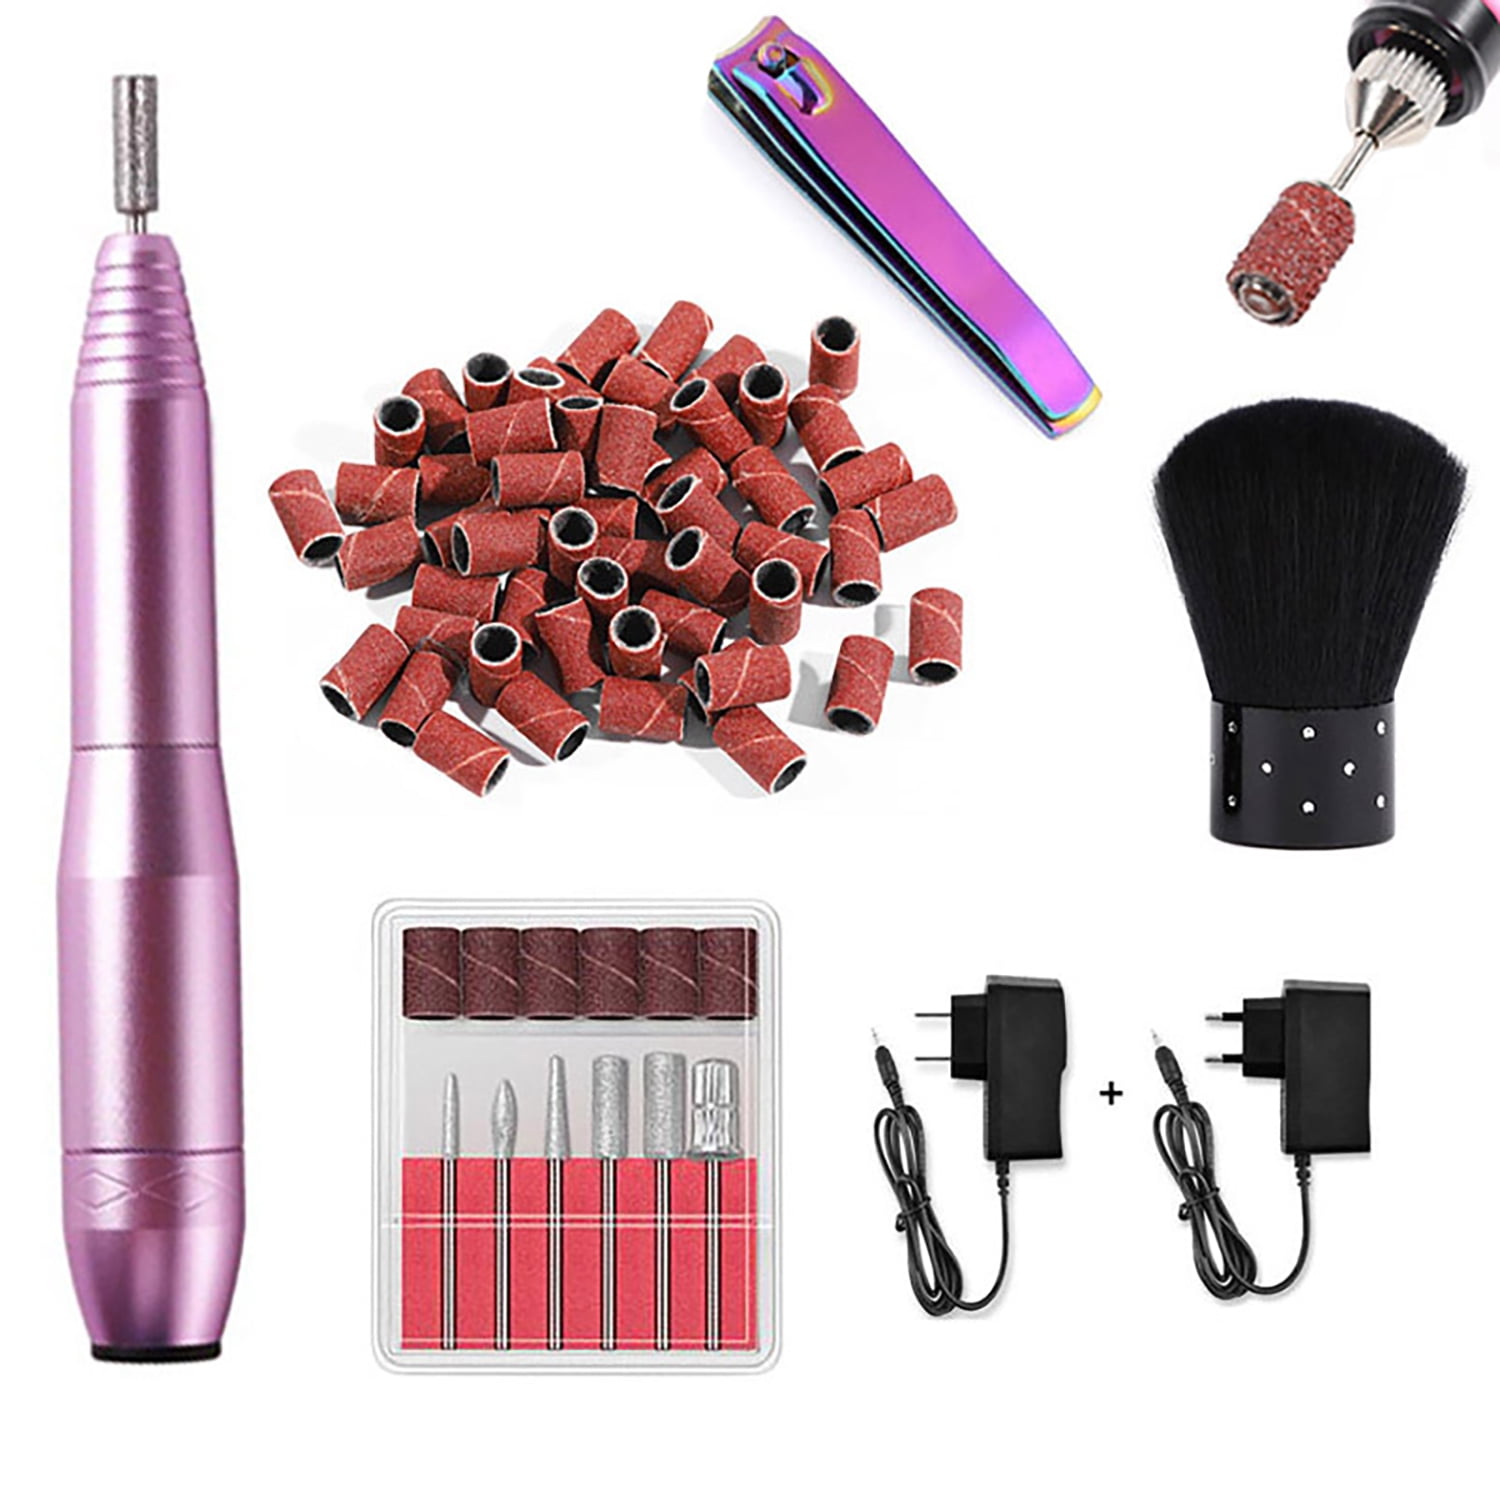 Amazon.com: Palmera Professional Nail Drill Nail Care Kit - Electric Nail  File with 17 Attachments, 30,000 RPM Motor, Adjustable Speed - Electric Nail  Drill Grinder Manicure and Pedicure Kit for Women, Men,